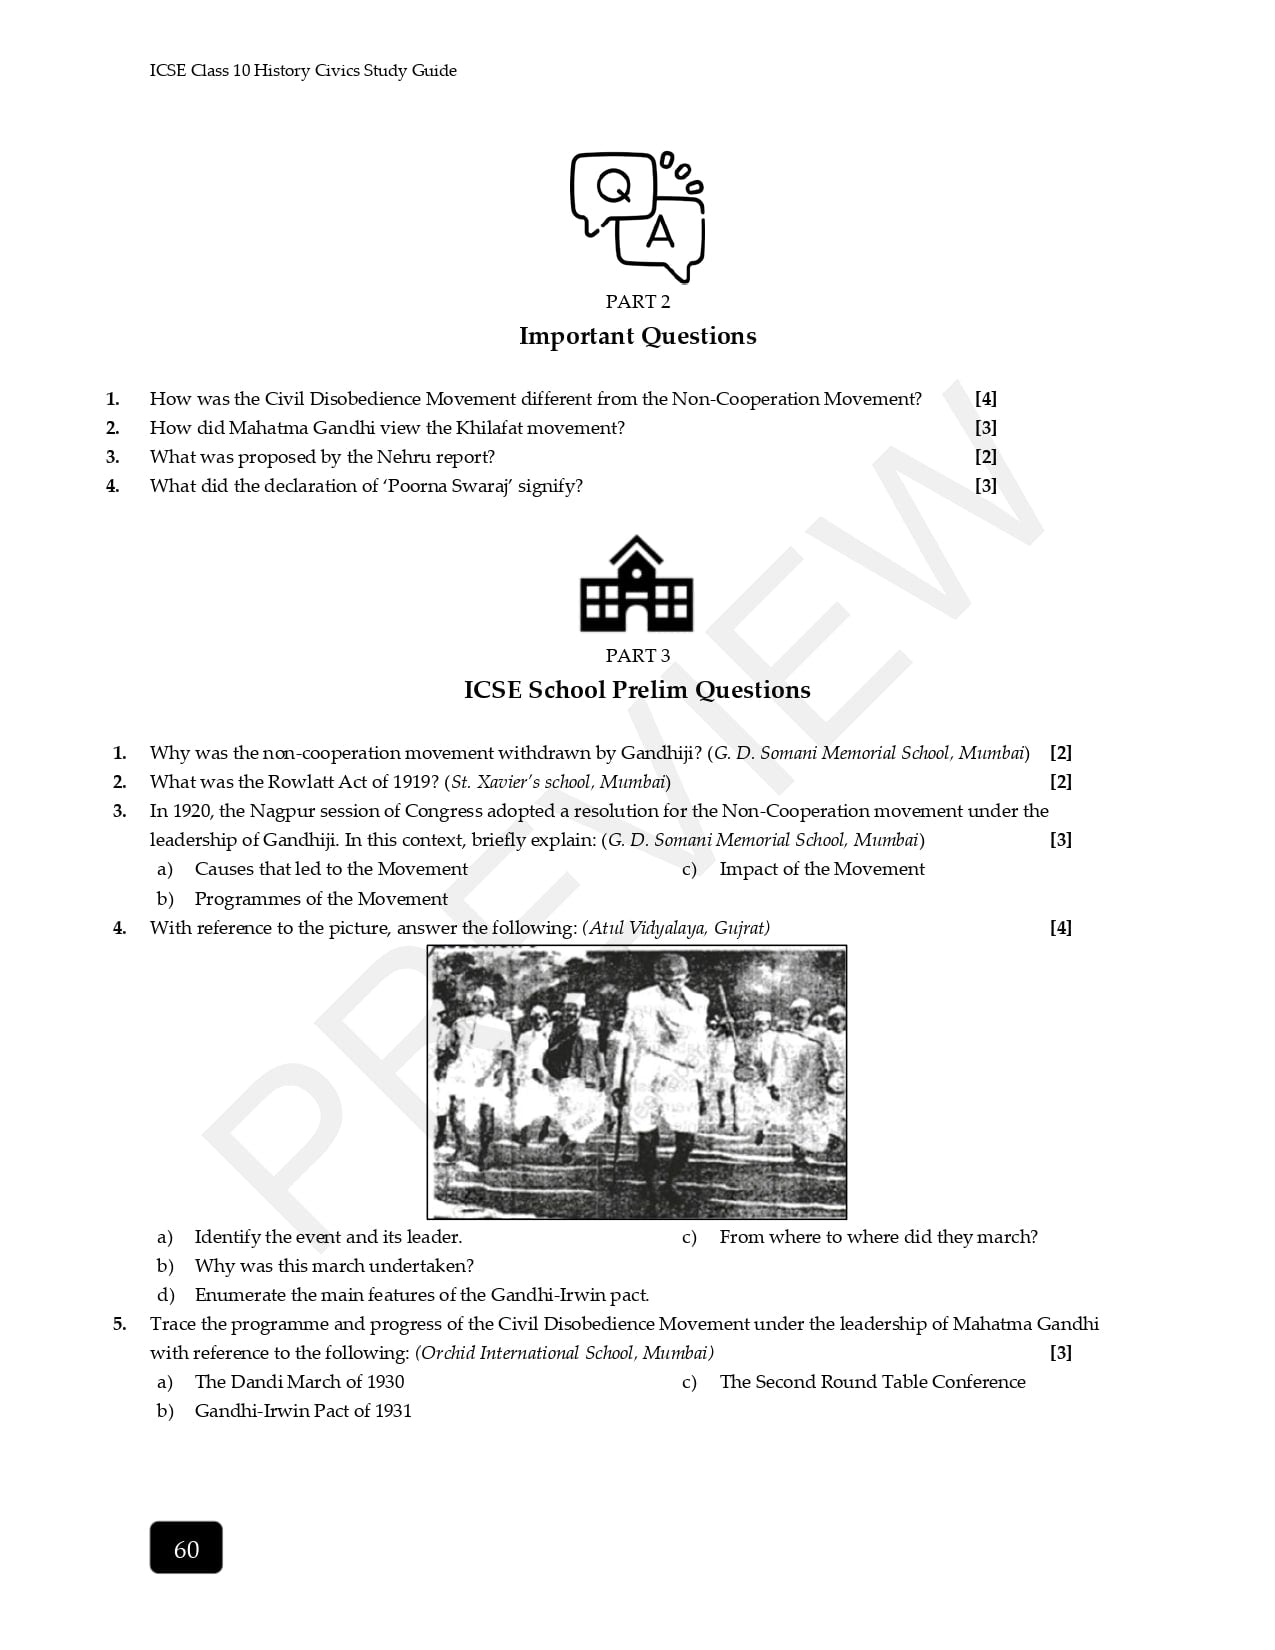 ICSE History and Civics Worksheets for Class 10